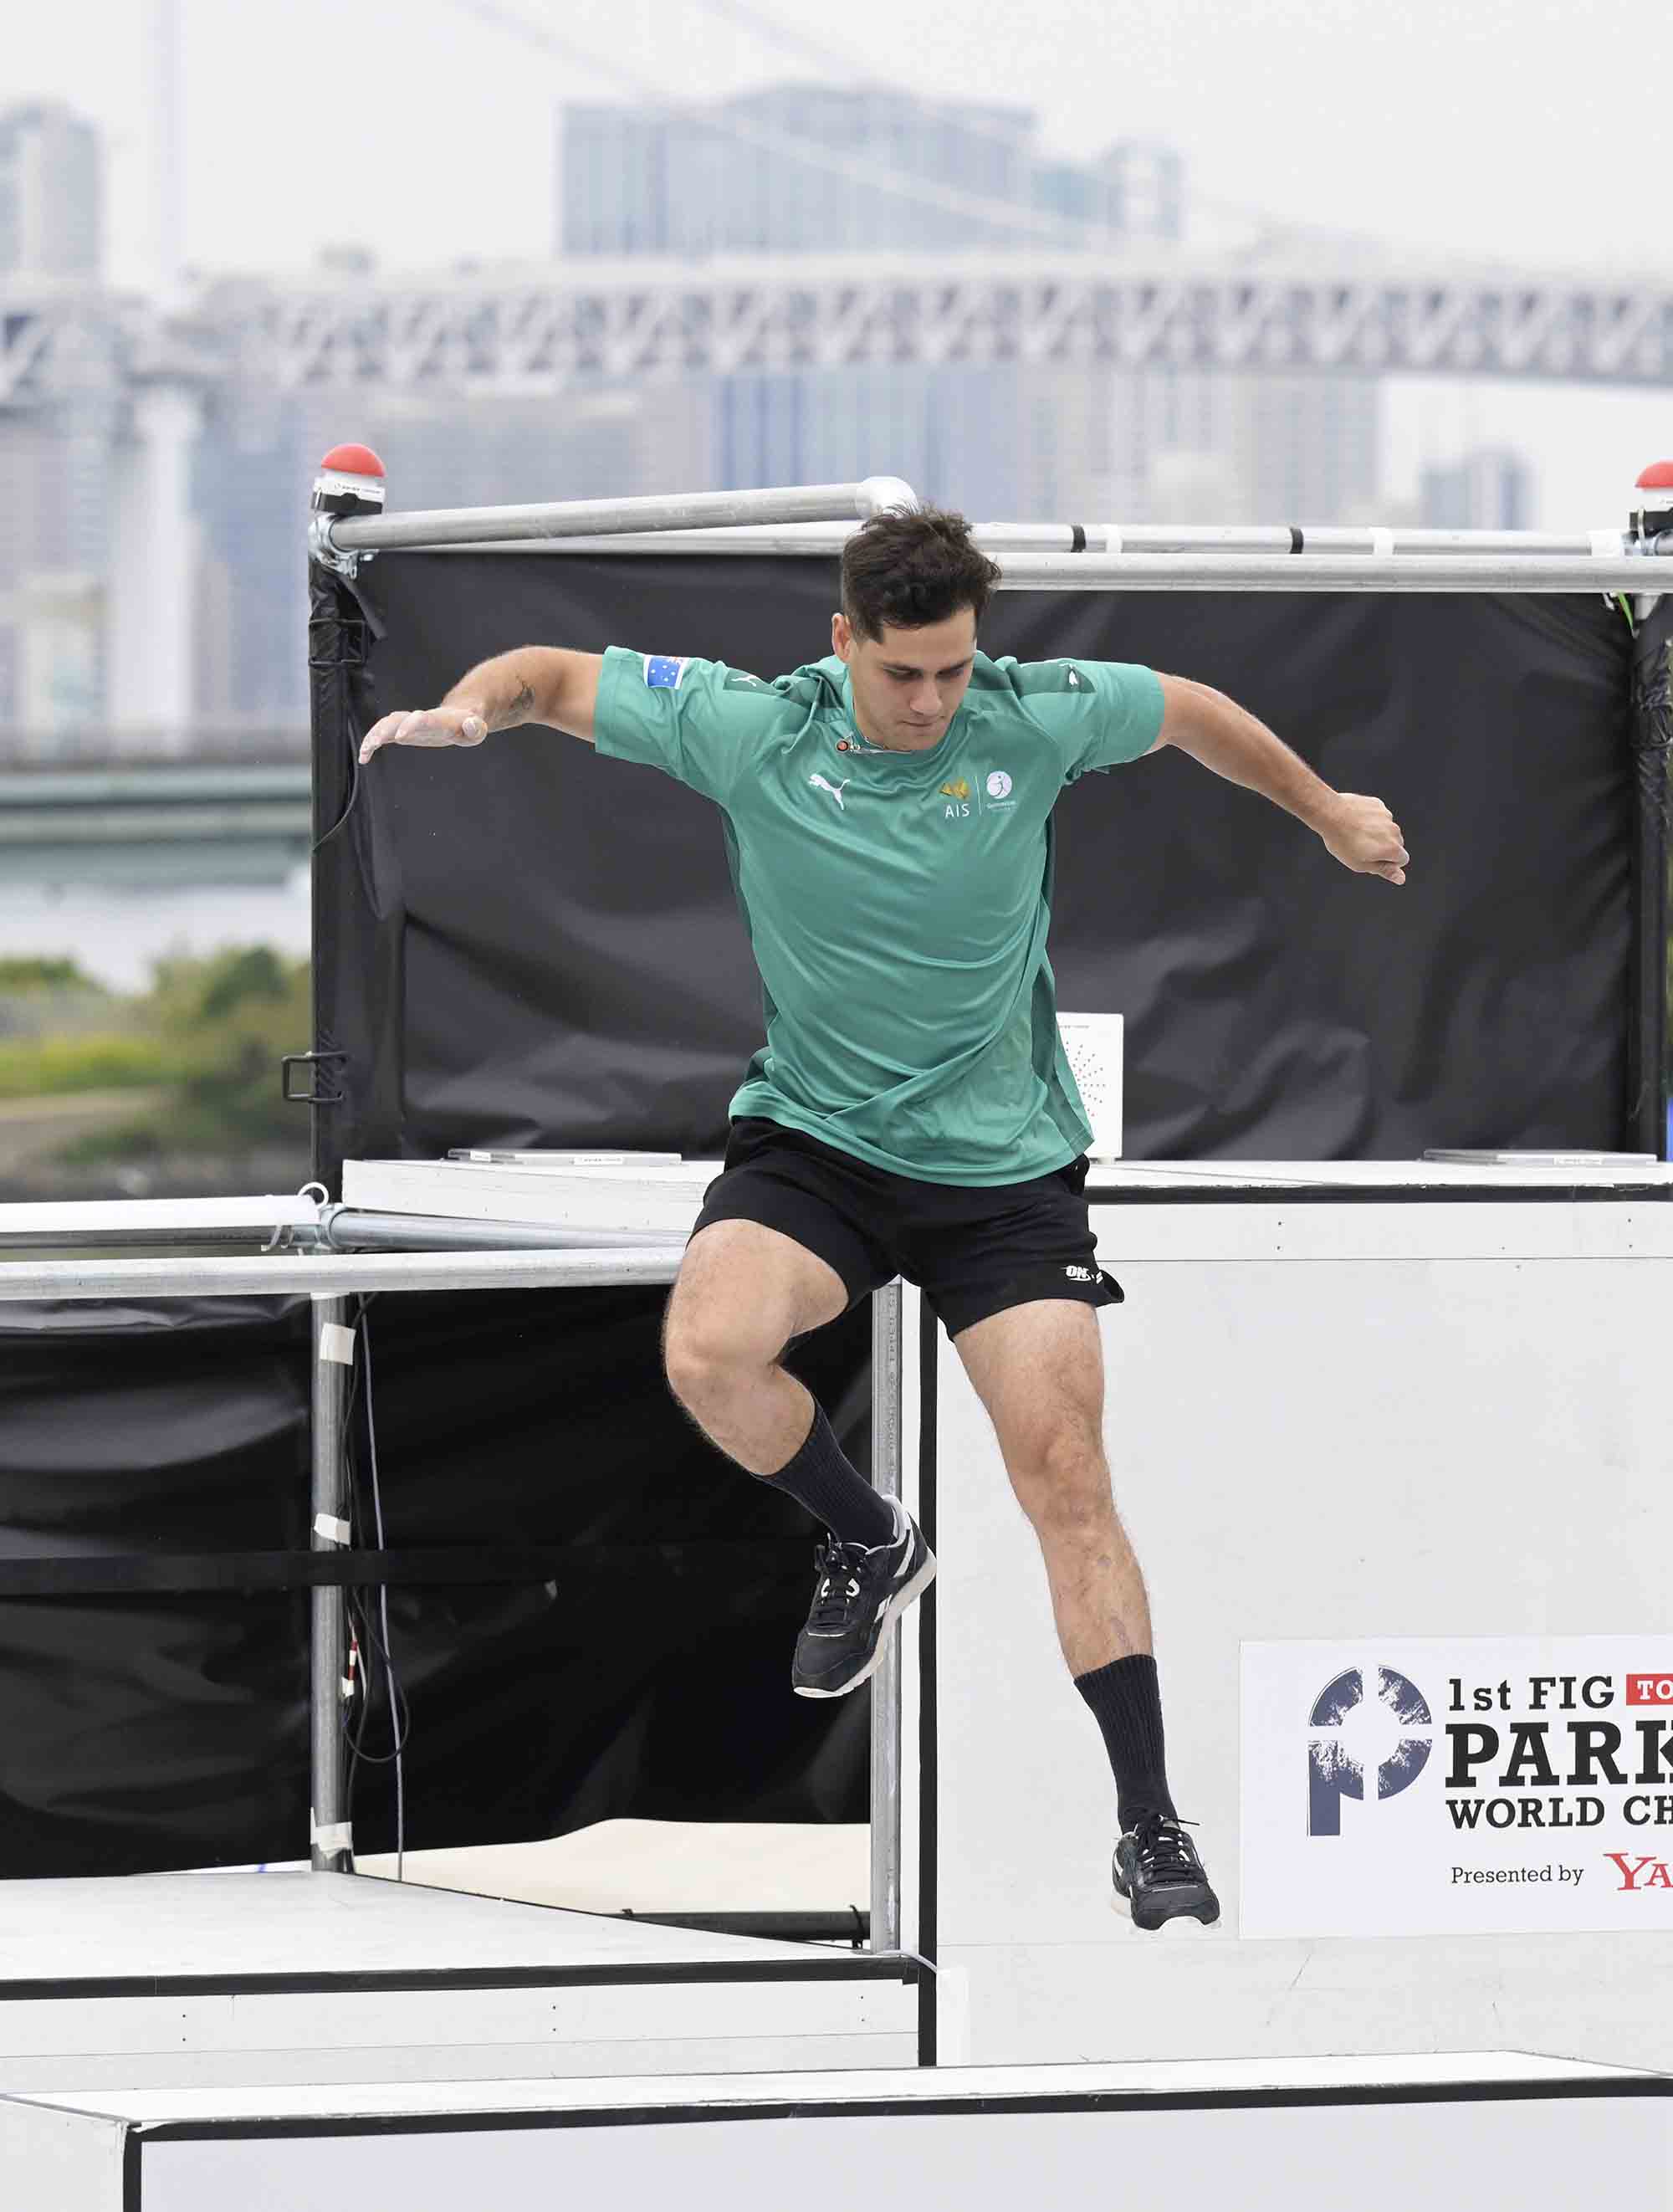 A male in street clothes and sneakers leaps from high ledge in a competition obstacle course.